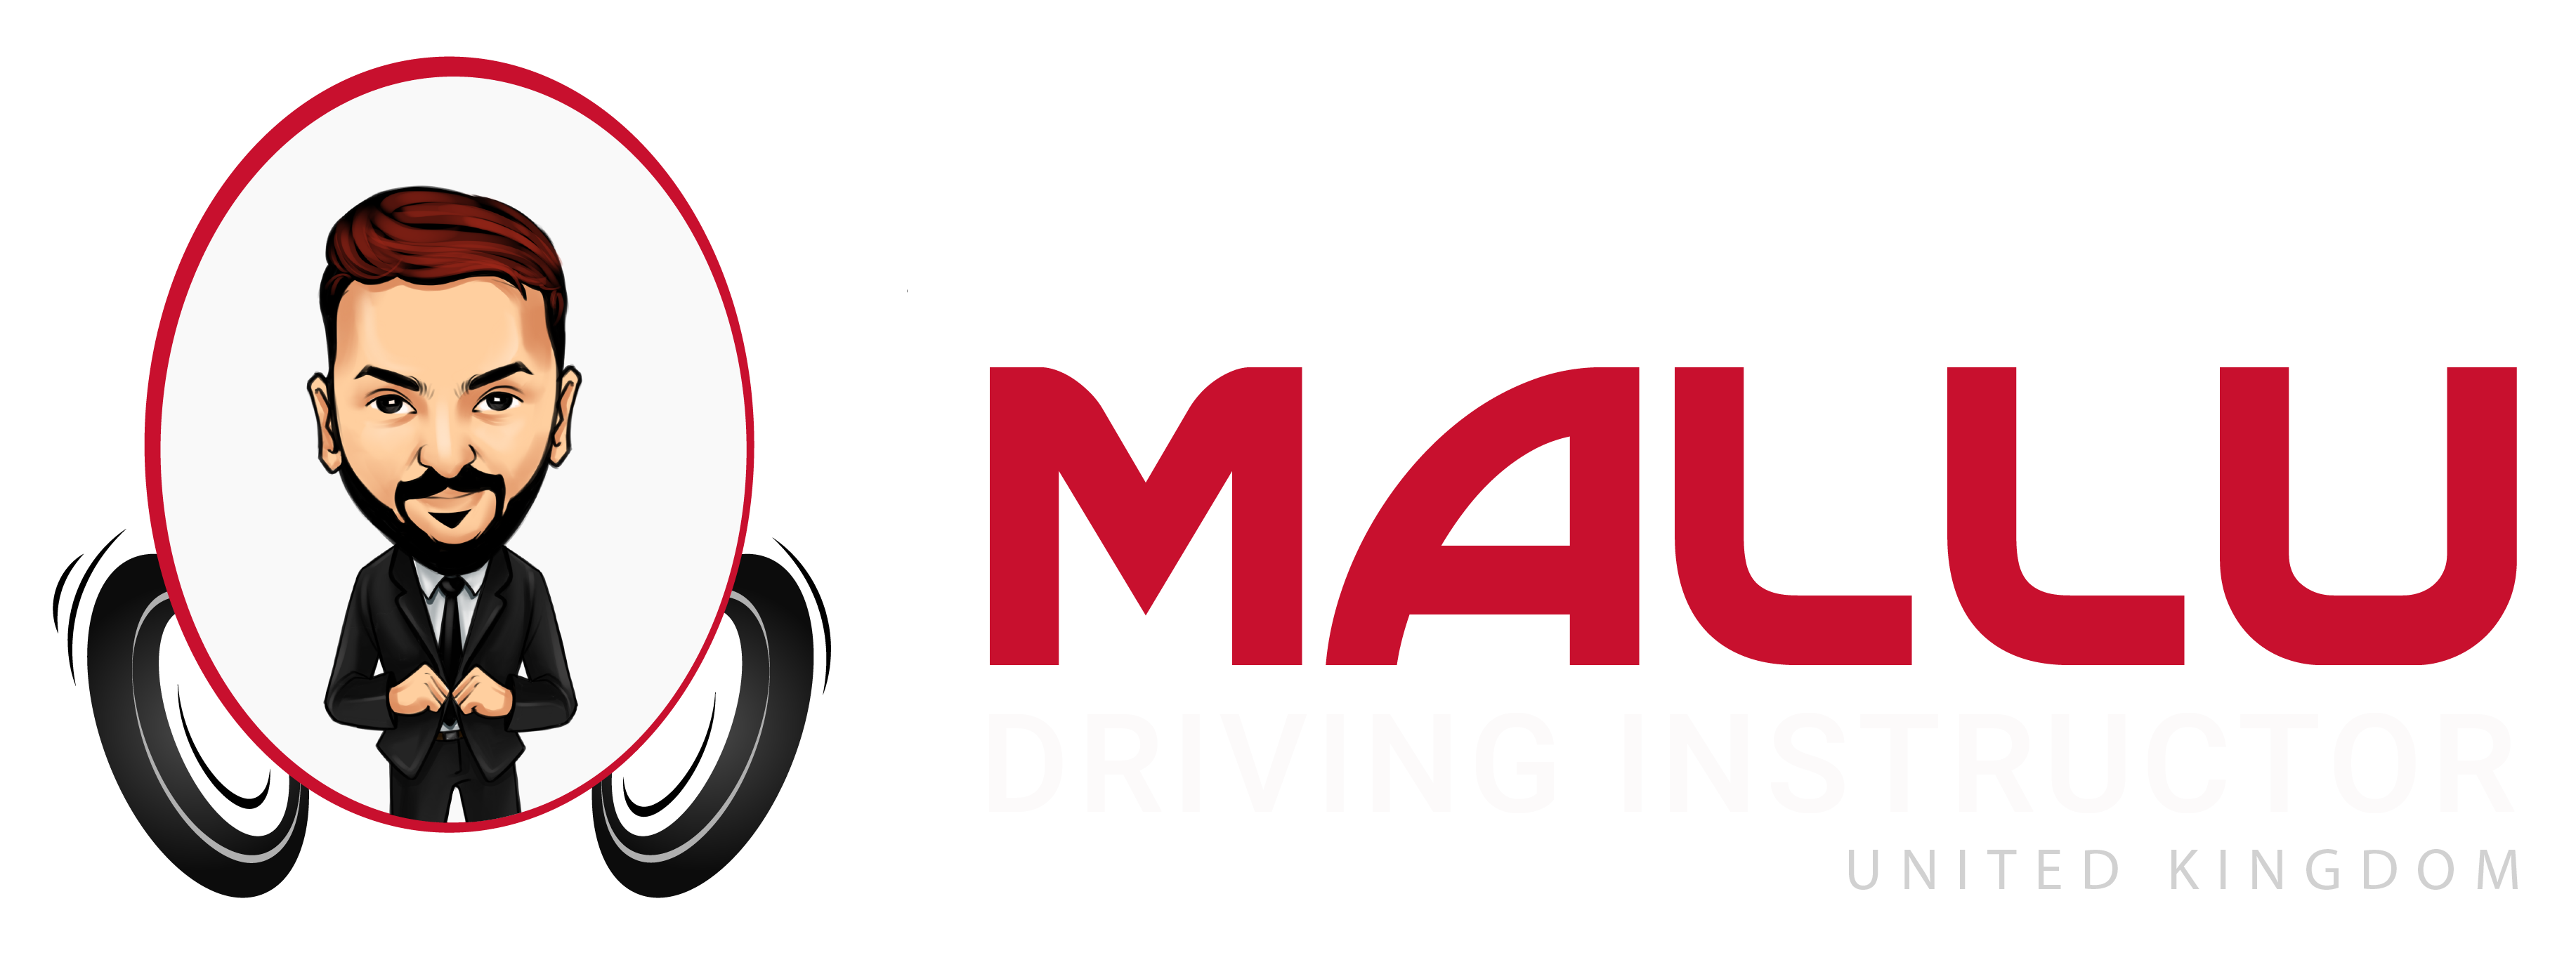 Mallu Driving Instructor in Leicester,Uk